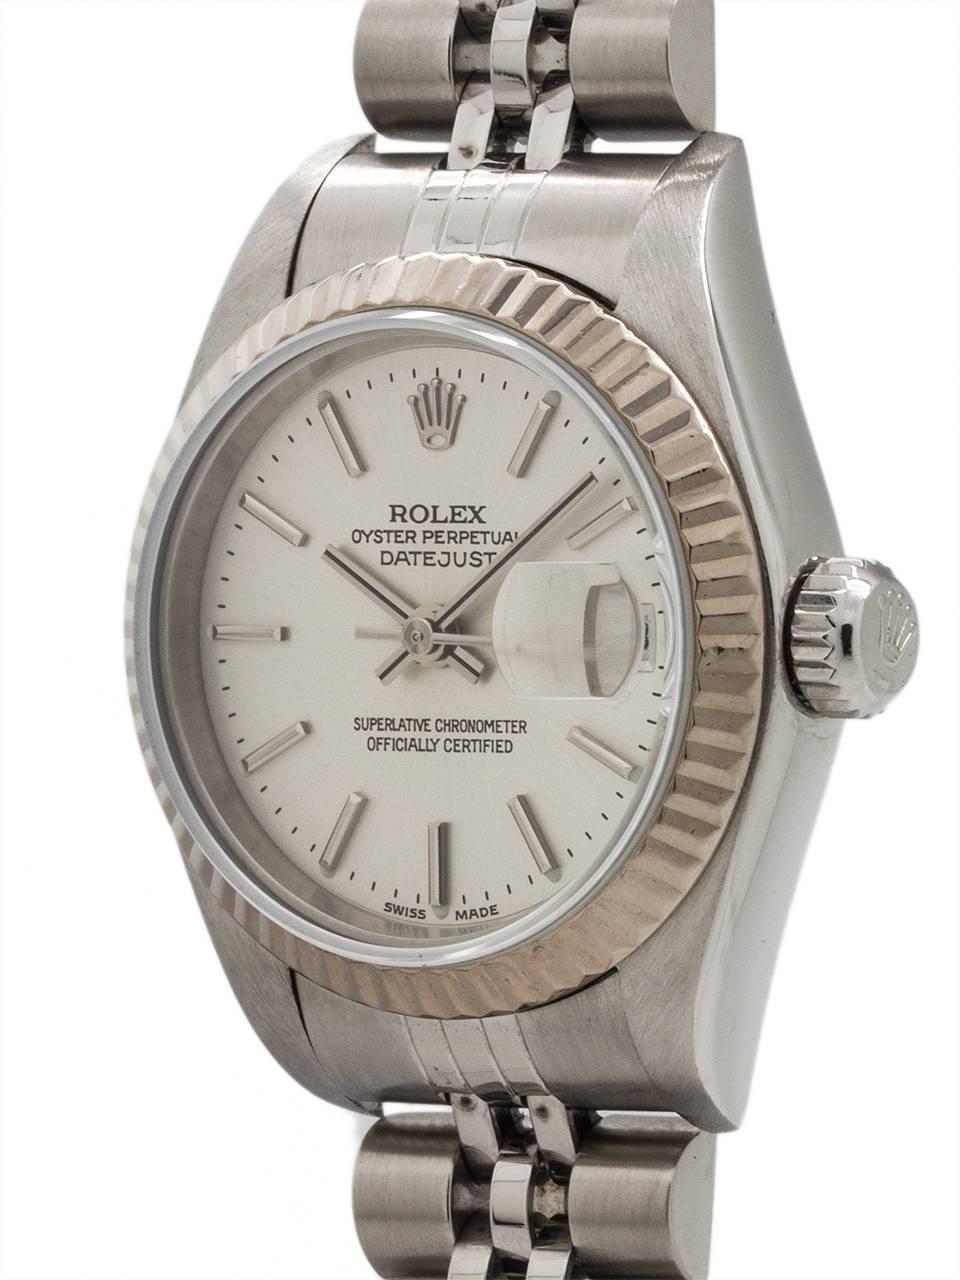 
Lady Rolex Datejust ref 79174 stainless steel 26mm diameter case with 18K WG fluted bezel, sapphire crystal, and original silver stick dial, circa 2003. Powered by self winding movement with sweep seconds and quick set date. With Rolex D link